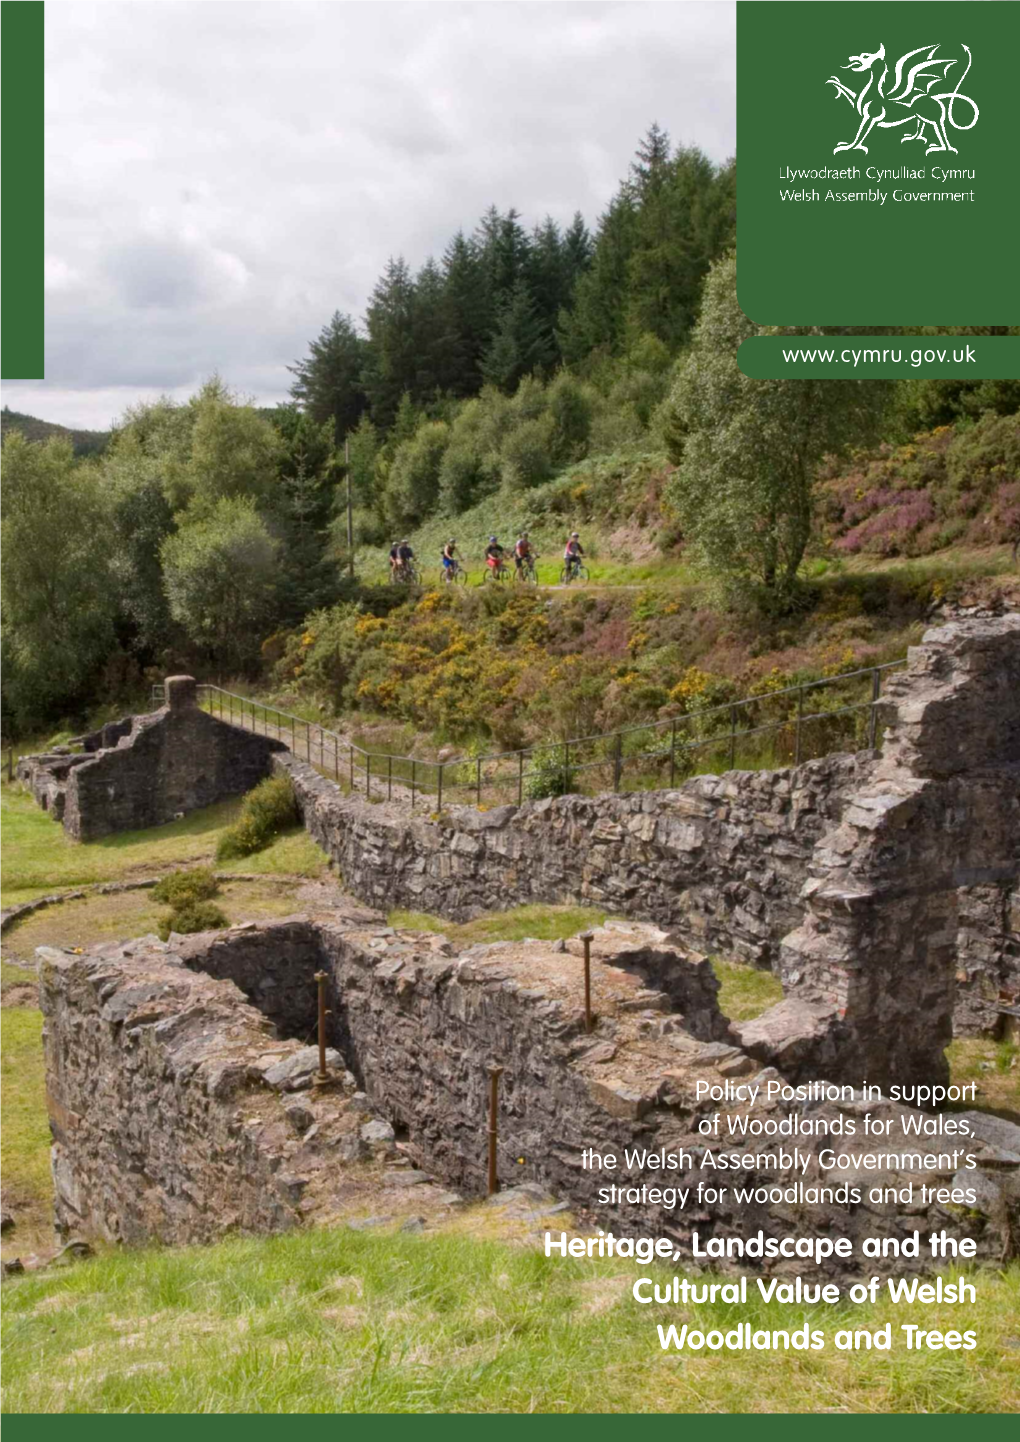 Heritage, Landscape and the Cultural Value of Welsh Woodlands and Trees Heritage, Landscape and the Cultural Value of Welsh Woodlands and Trees